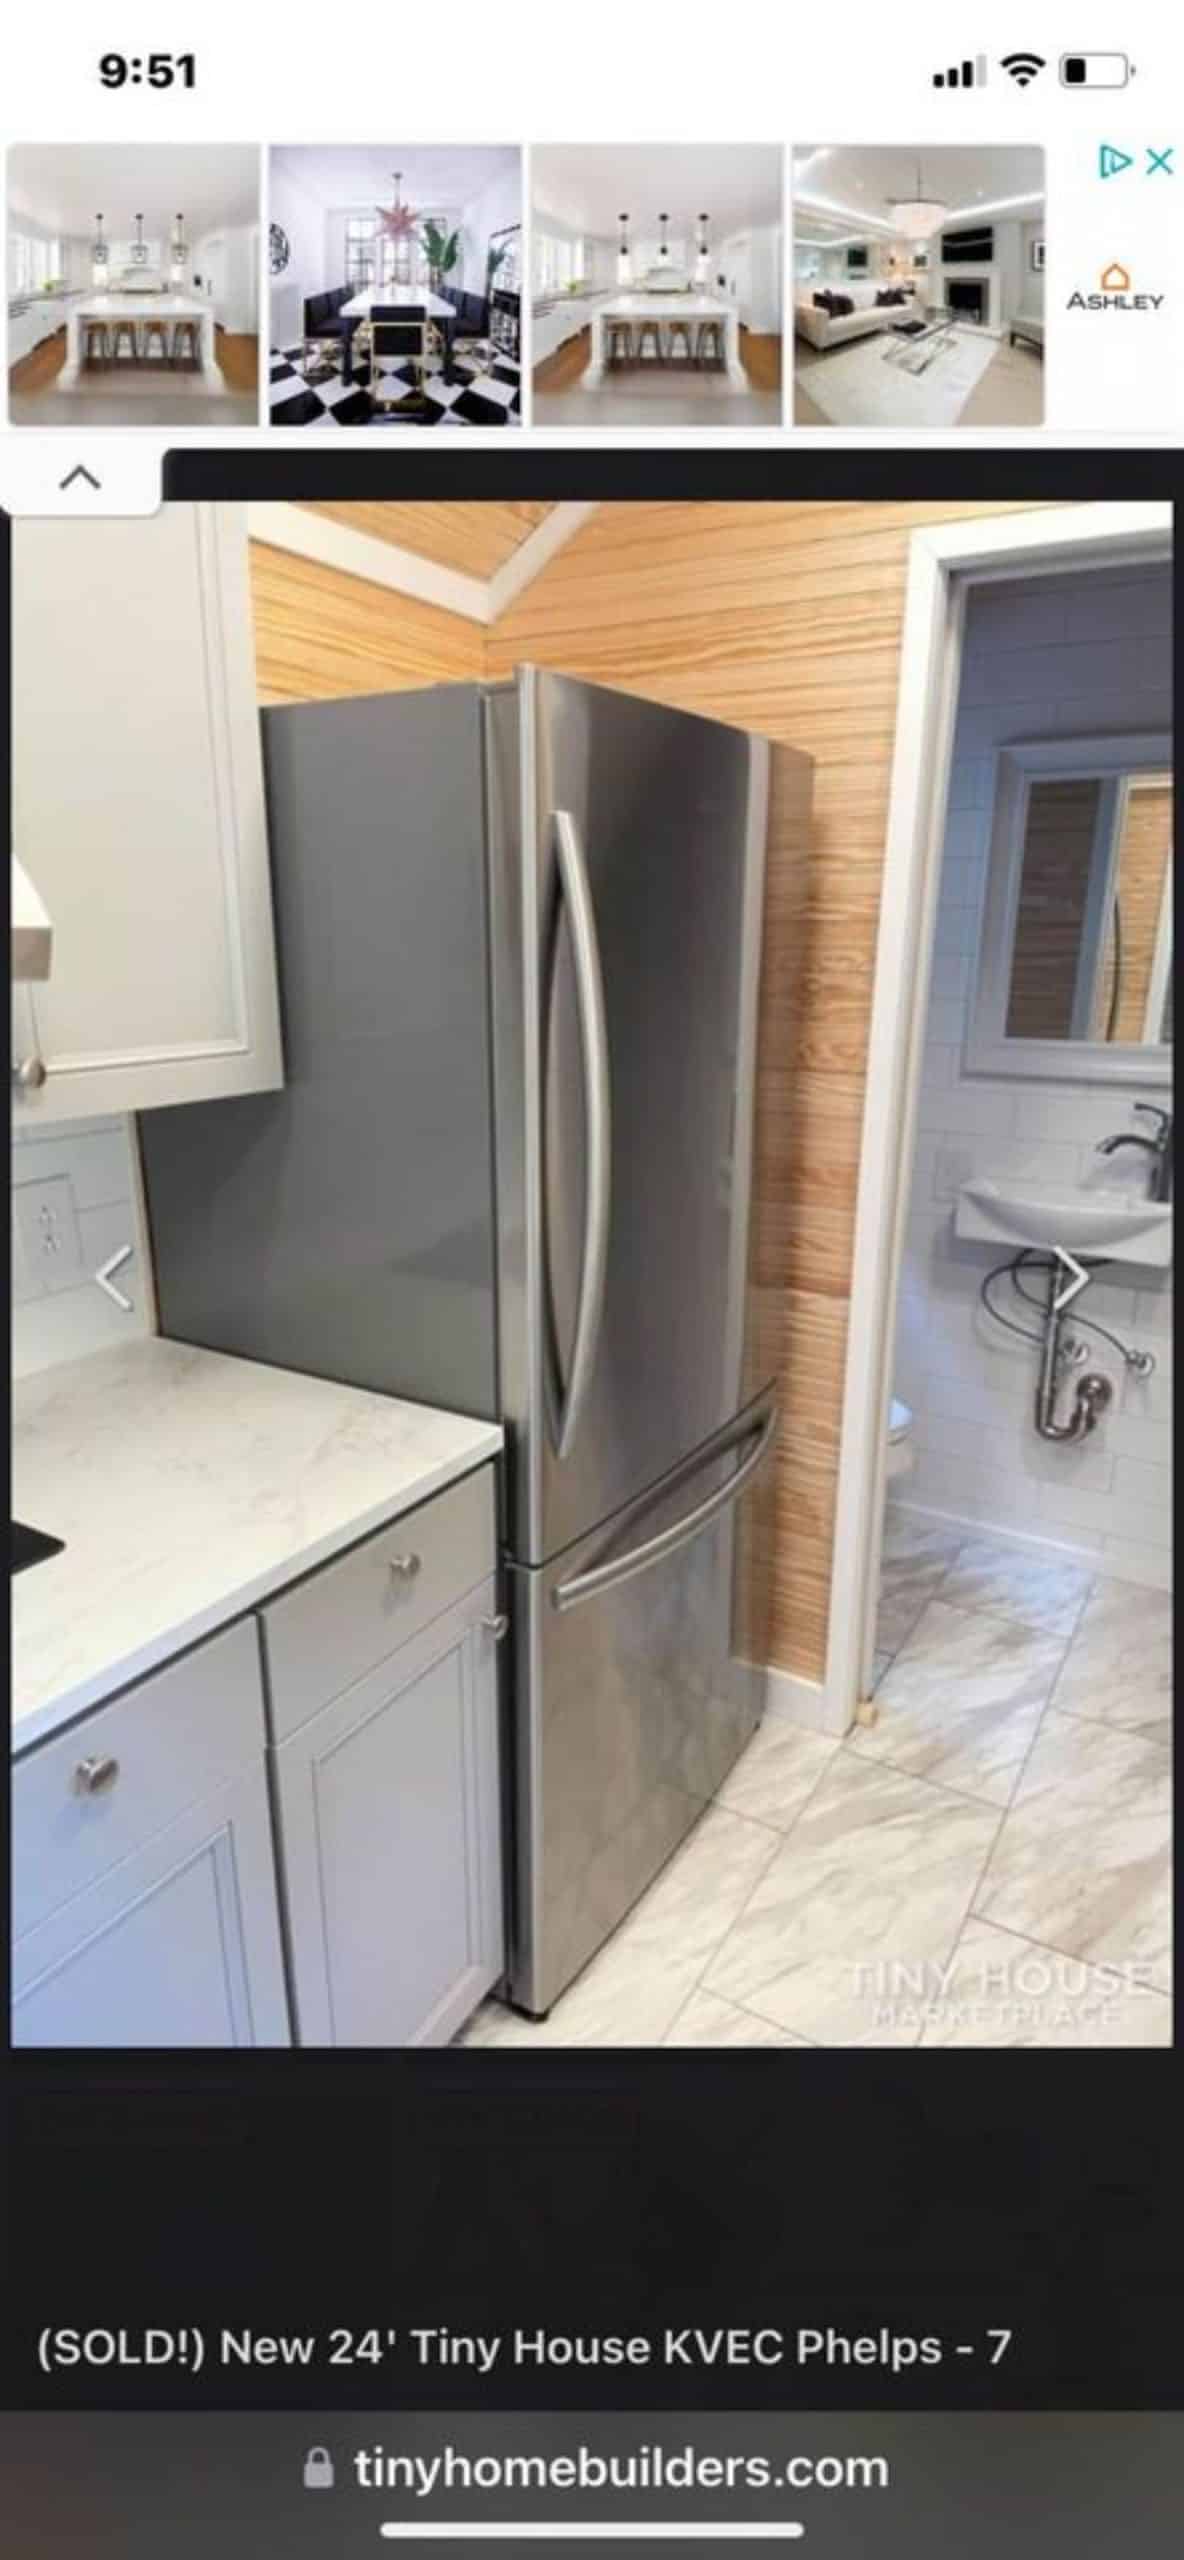 double door refrigerator and storage cabinets in kitchen area of cozy tiny home